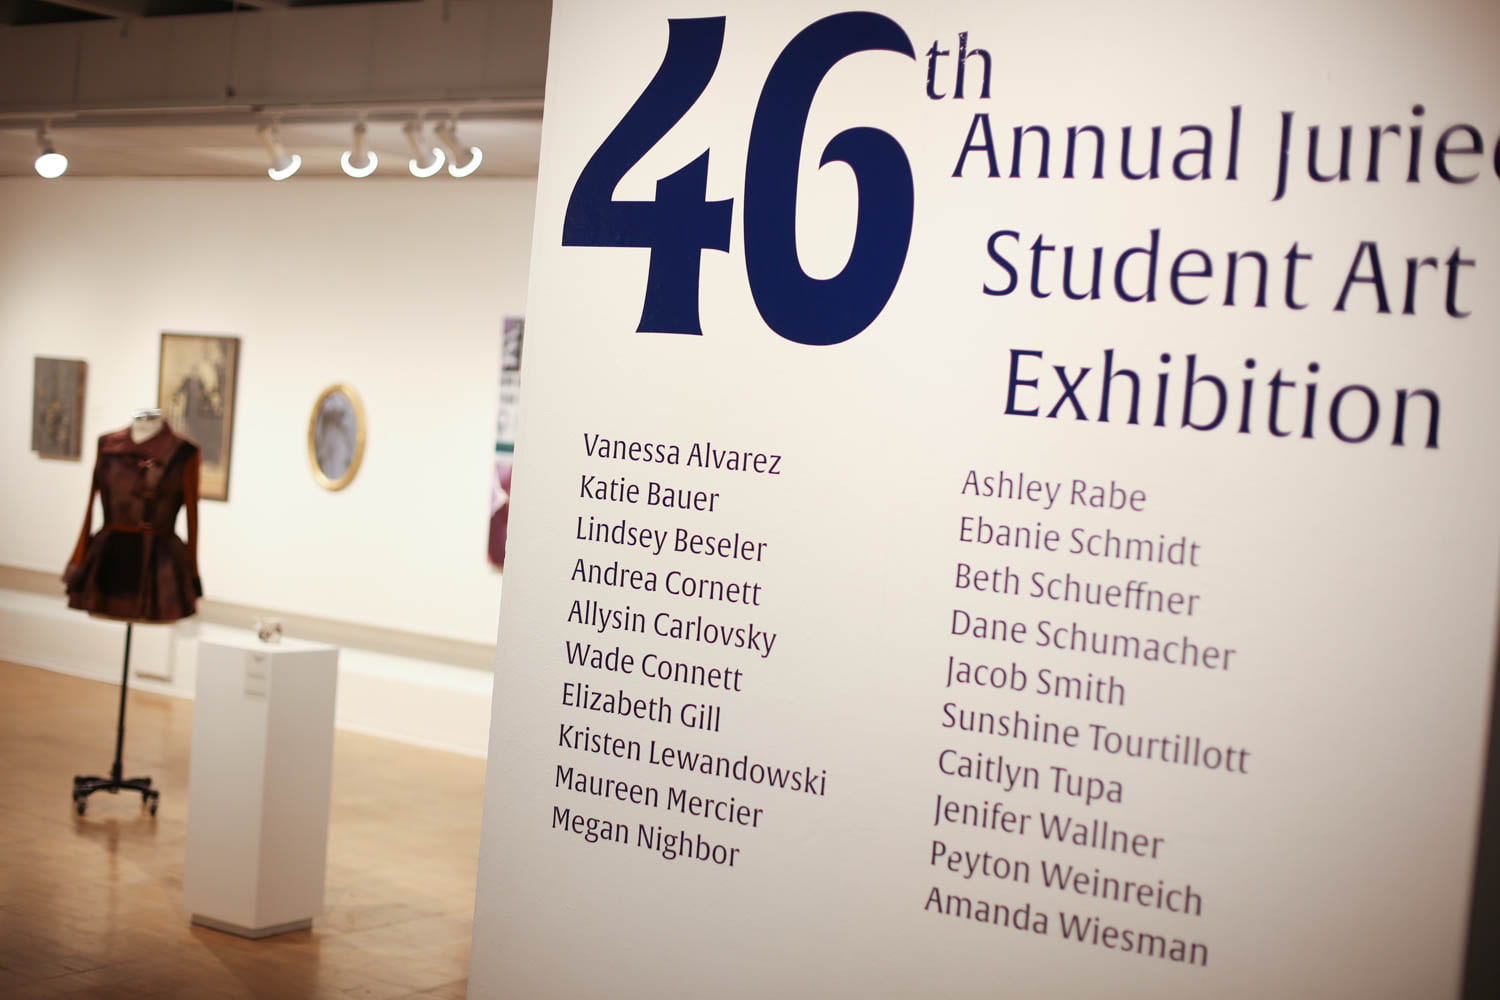 46th Annual Juried Student Art Exhibition